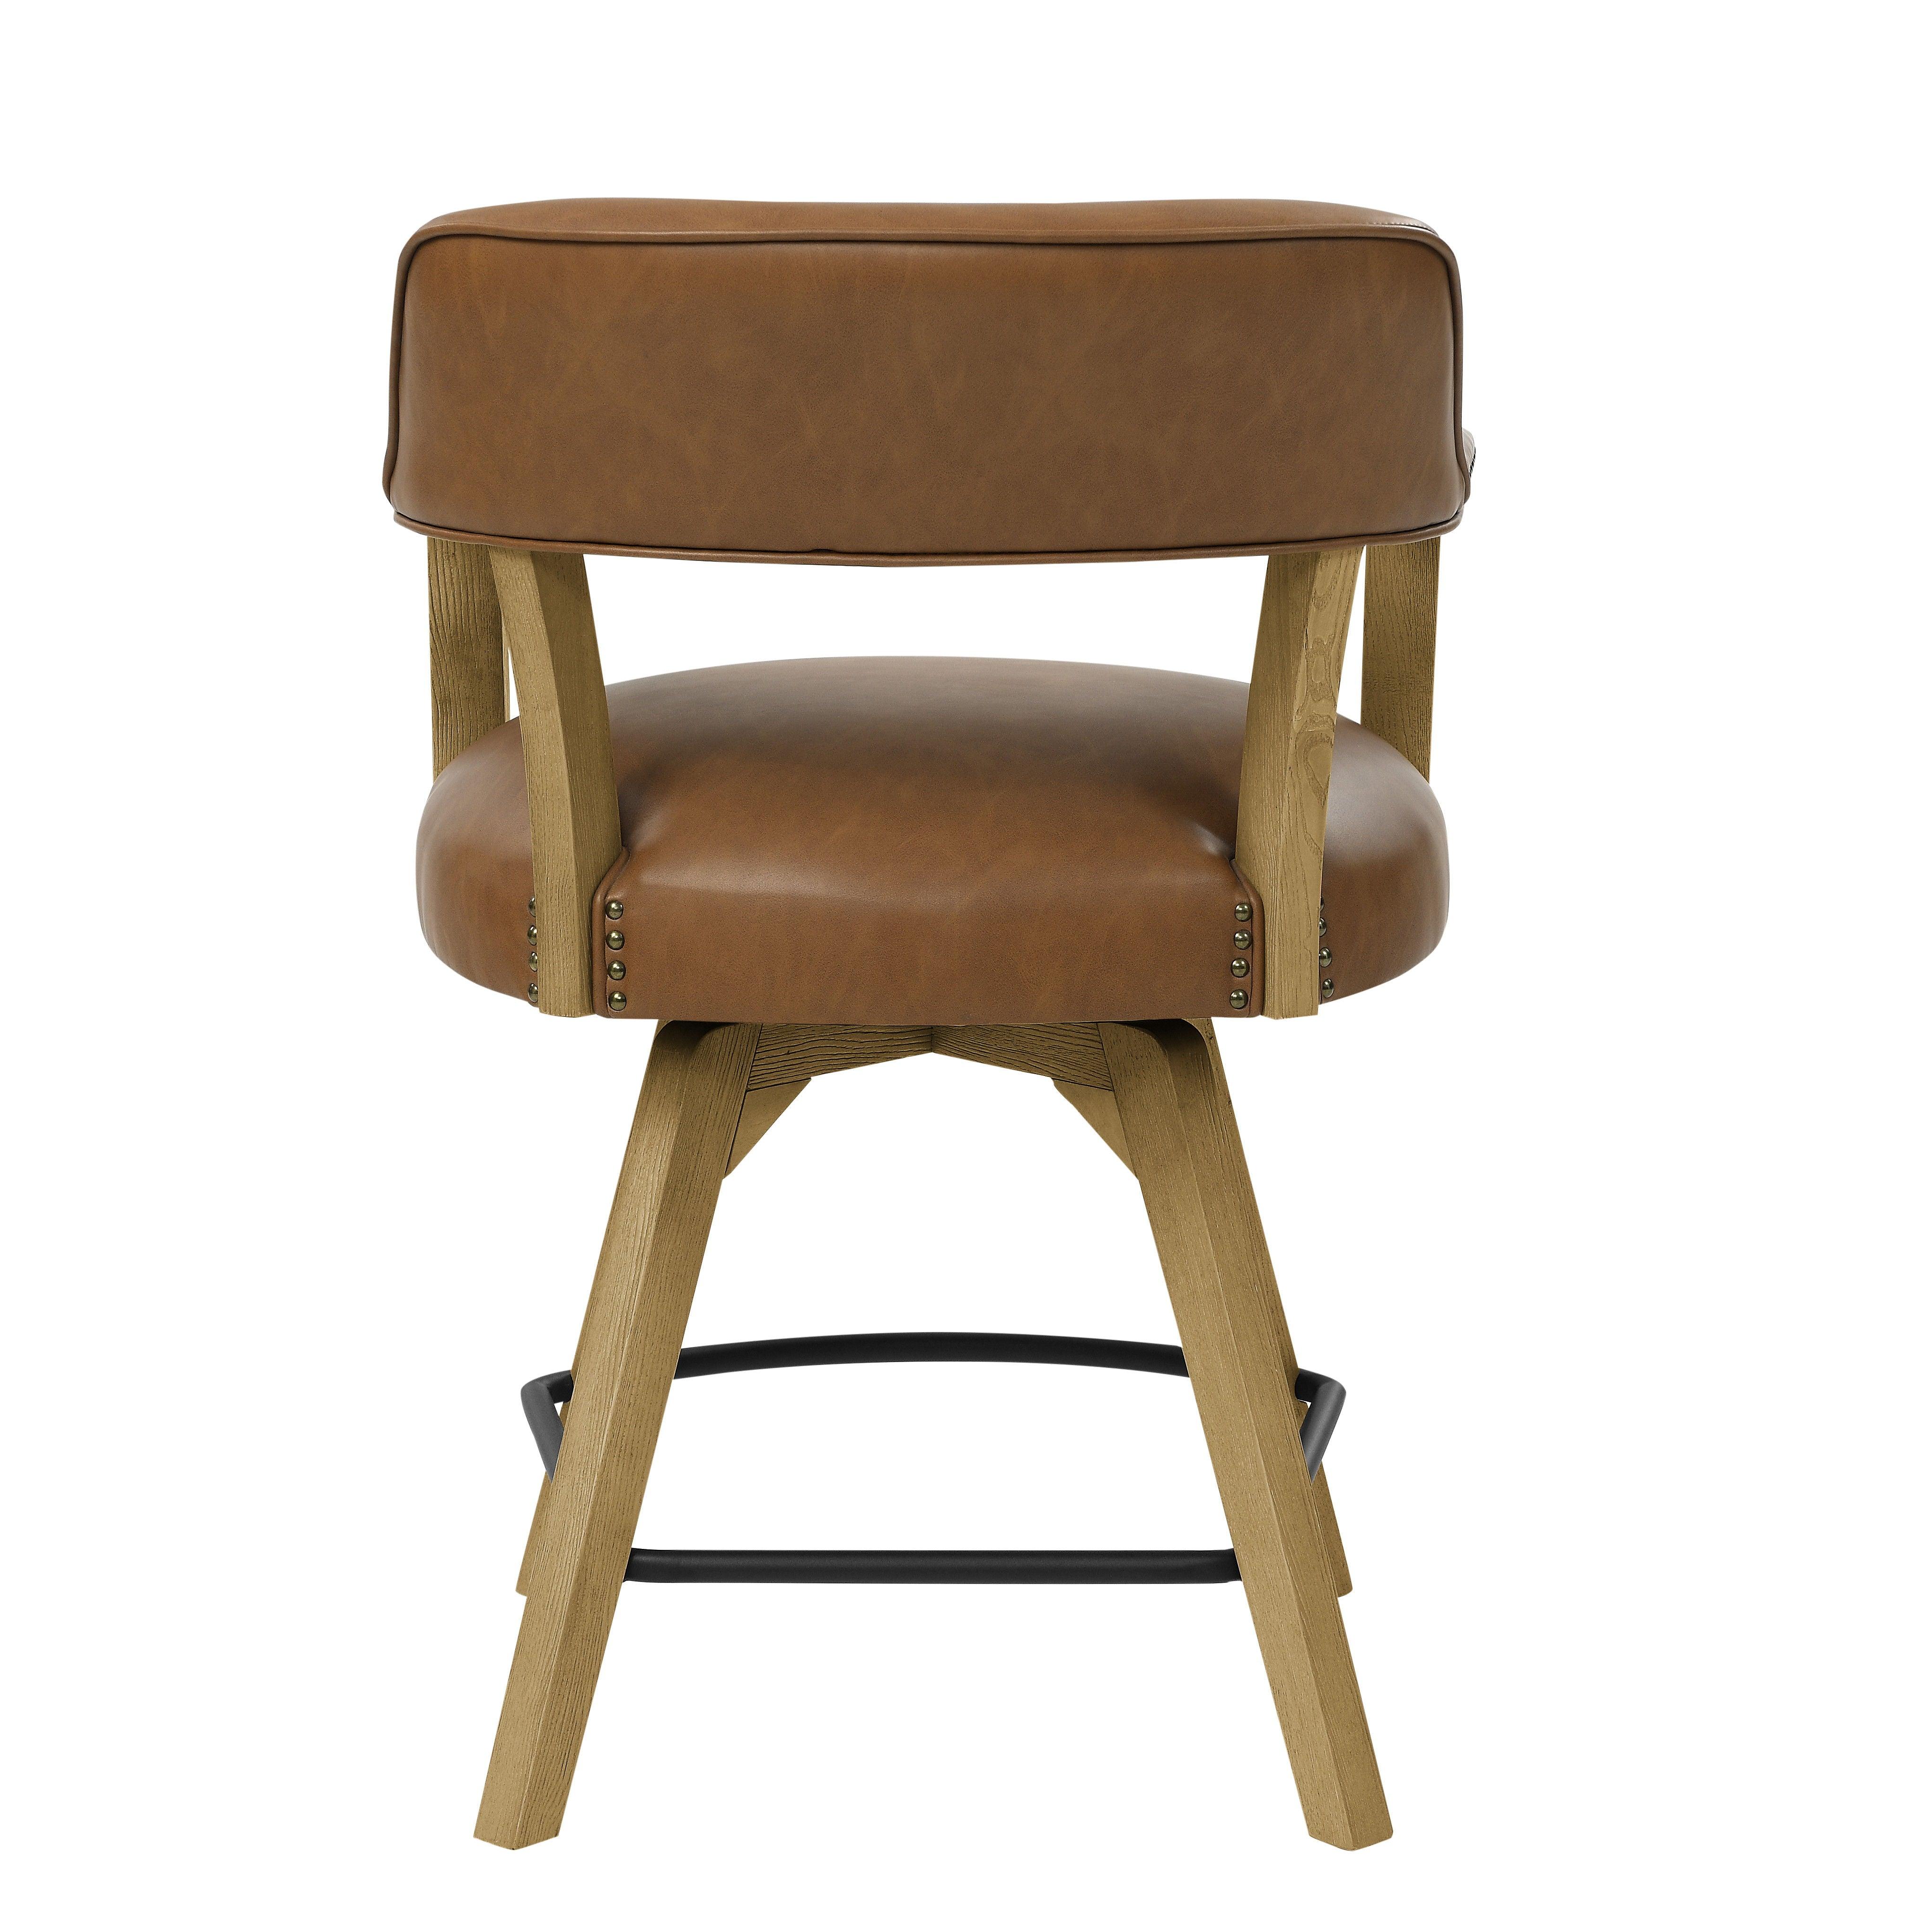 Steve Silver Furniture - Rylie - Swivel Vegan Leather Counter Chair - Camel - 5th Avenue Furniture